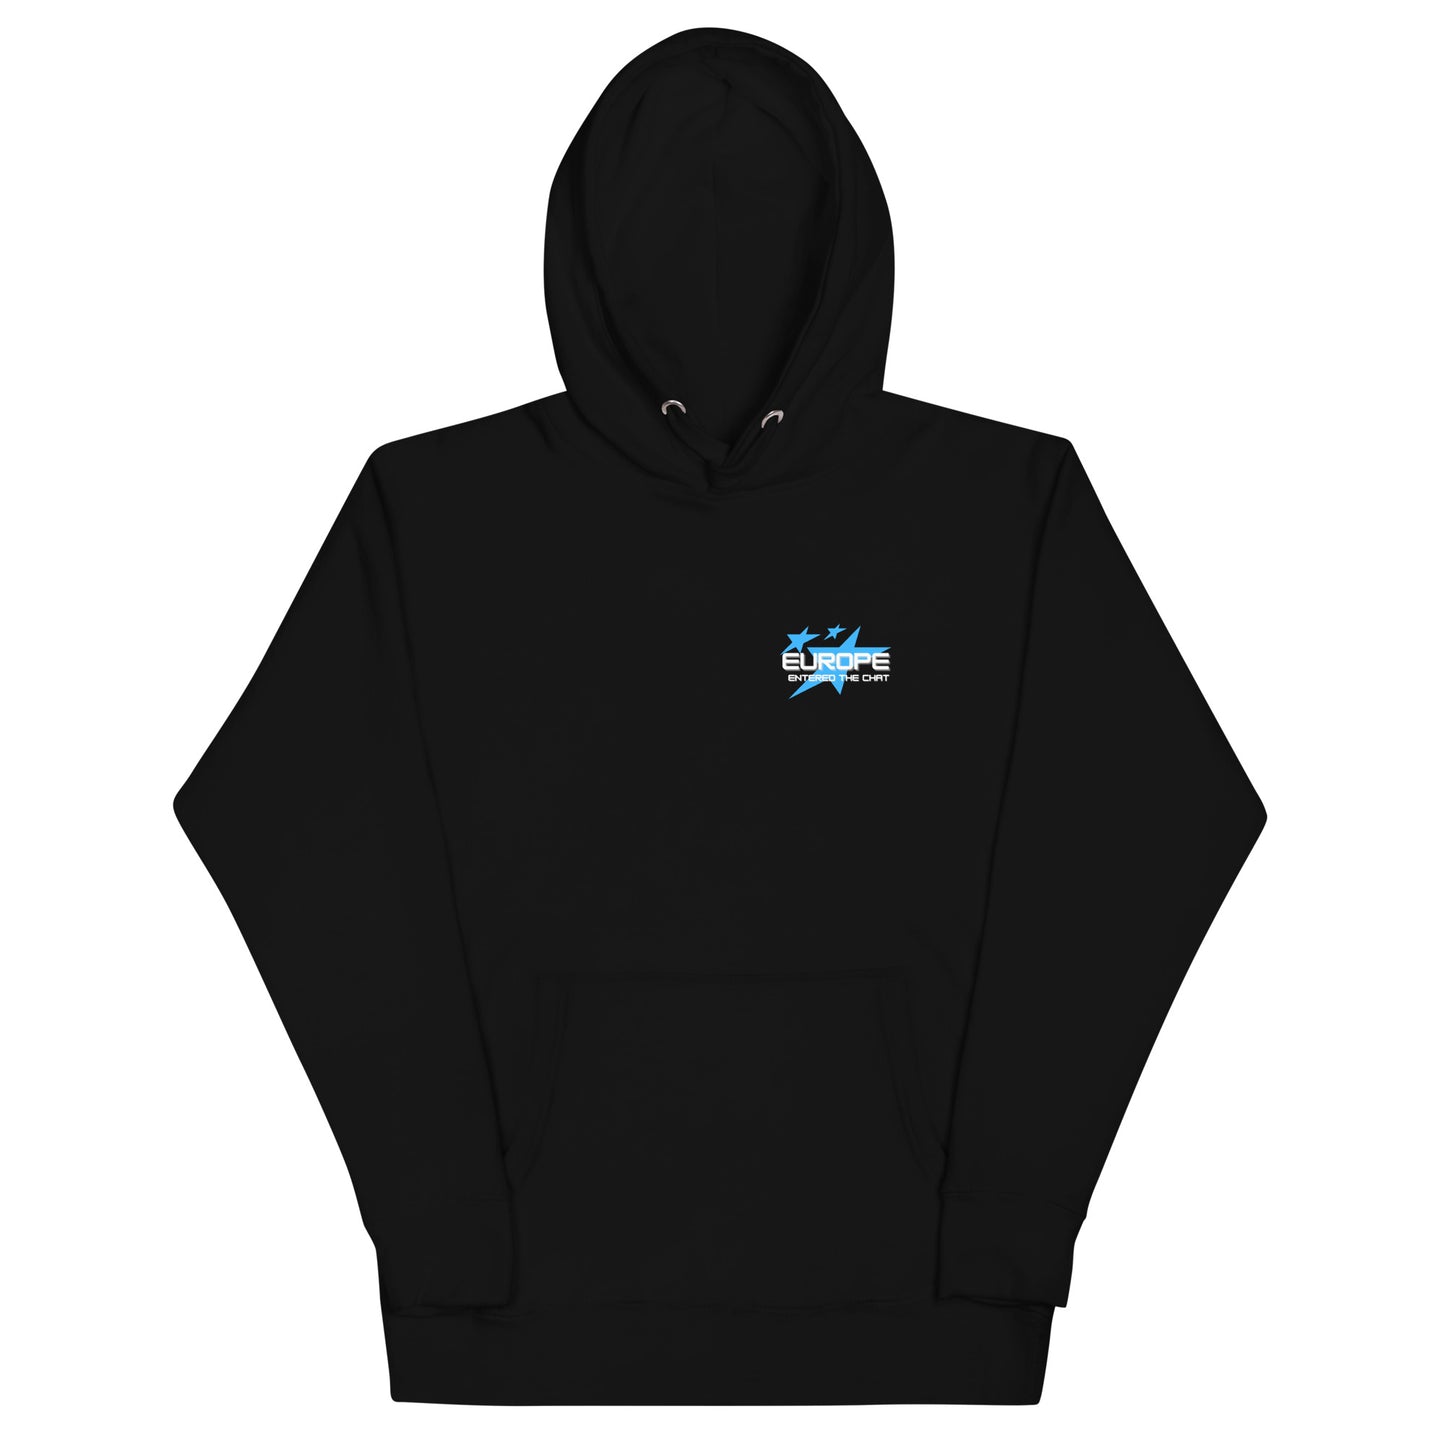 Europe Entered the Chat Unisex Hoodie